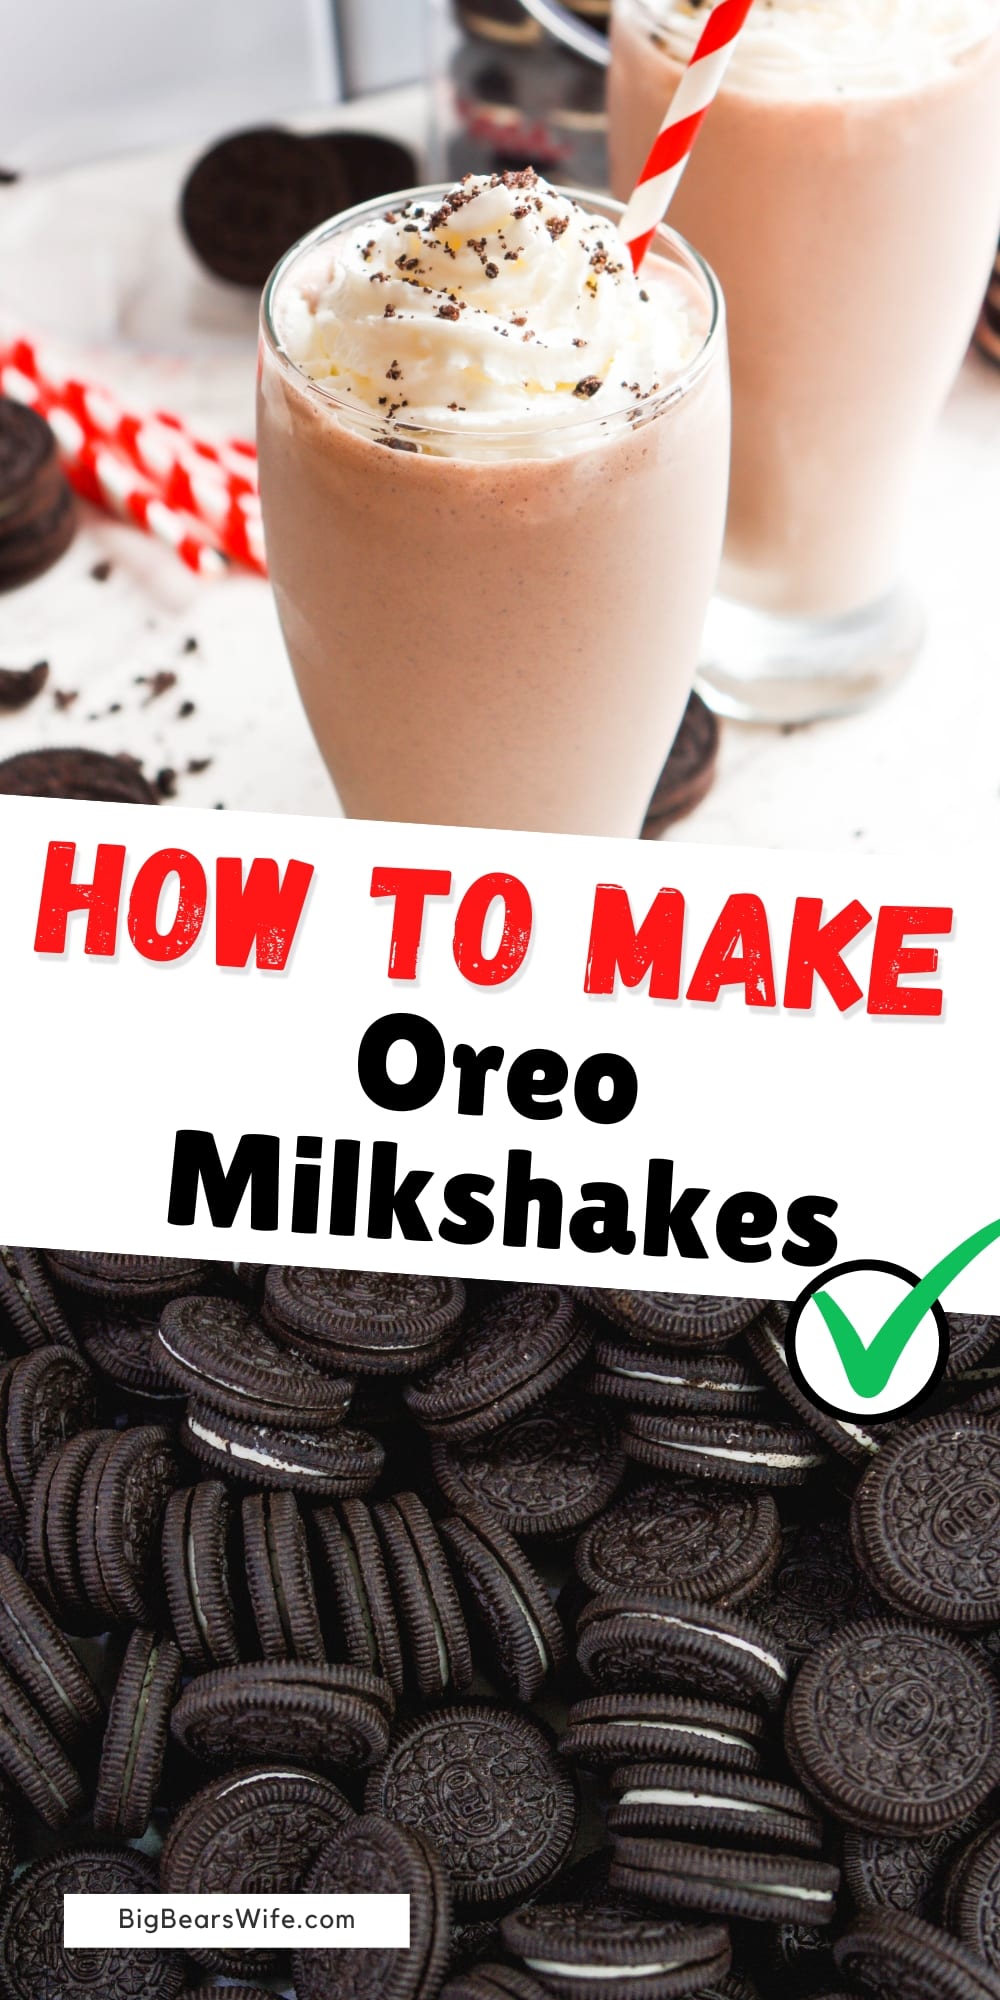 From old school diners to restaurants all over, the OREO milkshake has become a classic favorite of young and old alike! Combine your favorite chocolate sandwich cookies and vanilla ice cream for the perfect homemade milkshake! via @bigbearswife